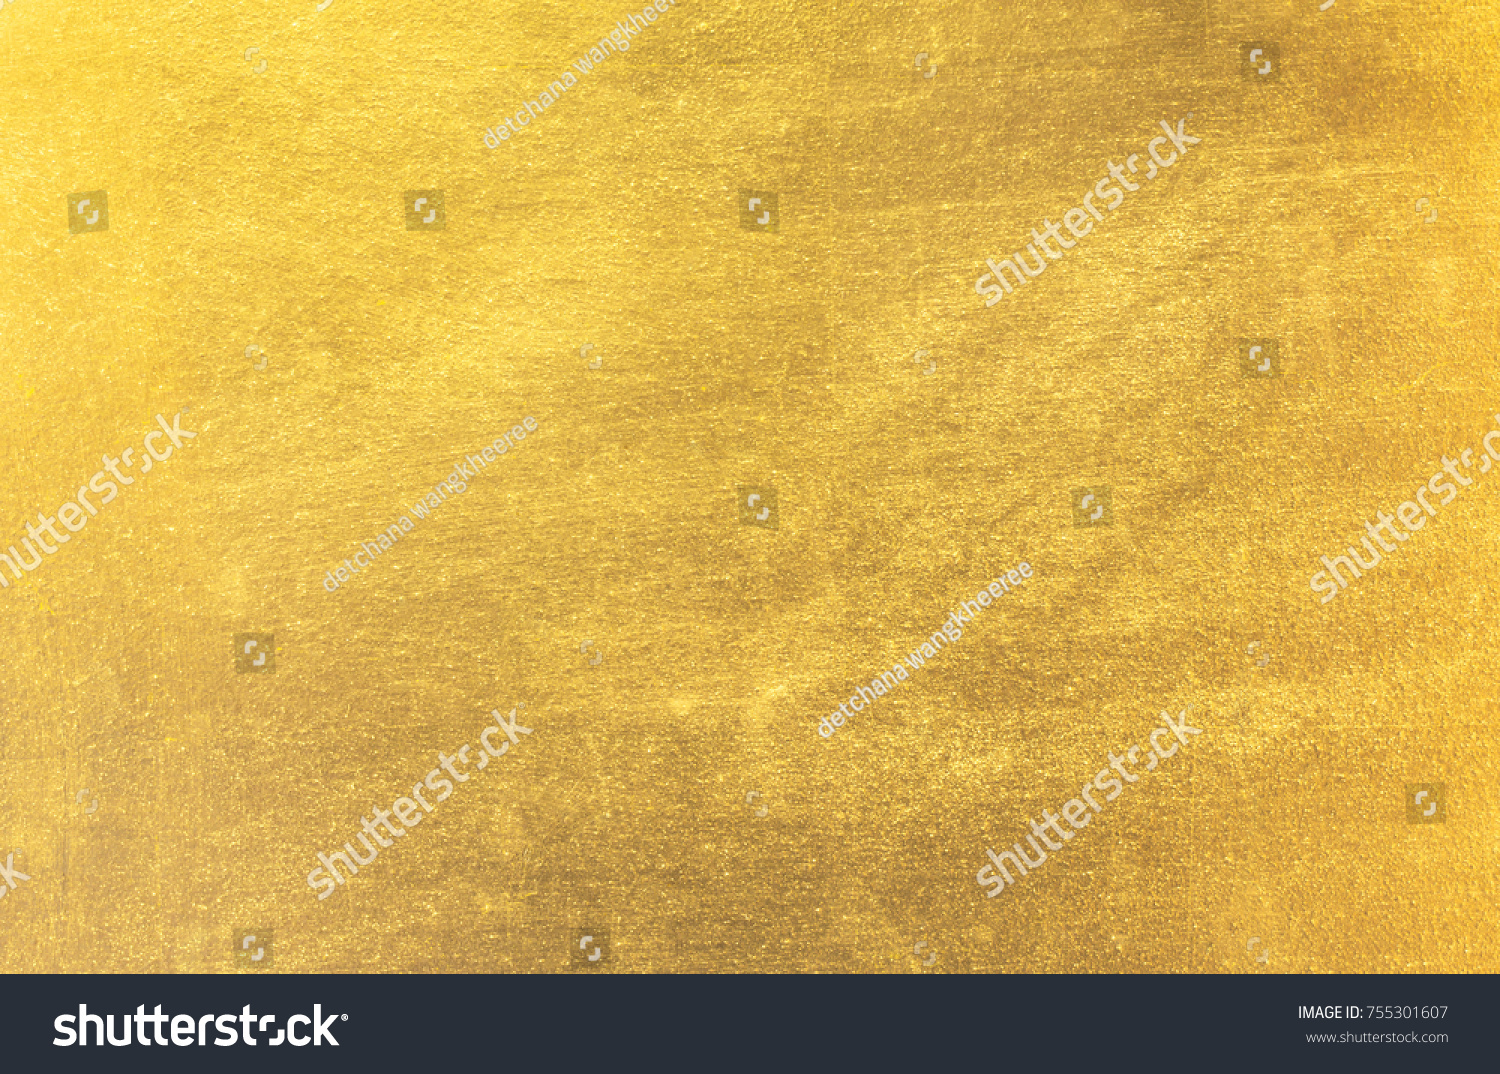 Shiny yellow leaf gold foil texture background #755301607